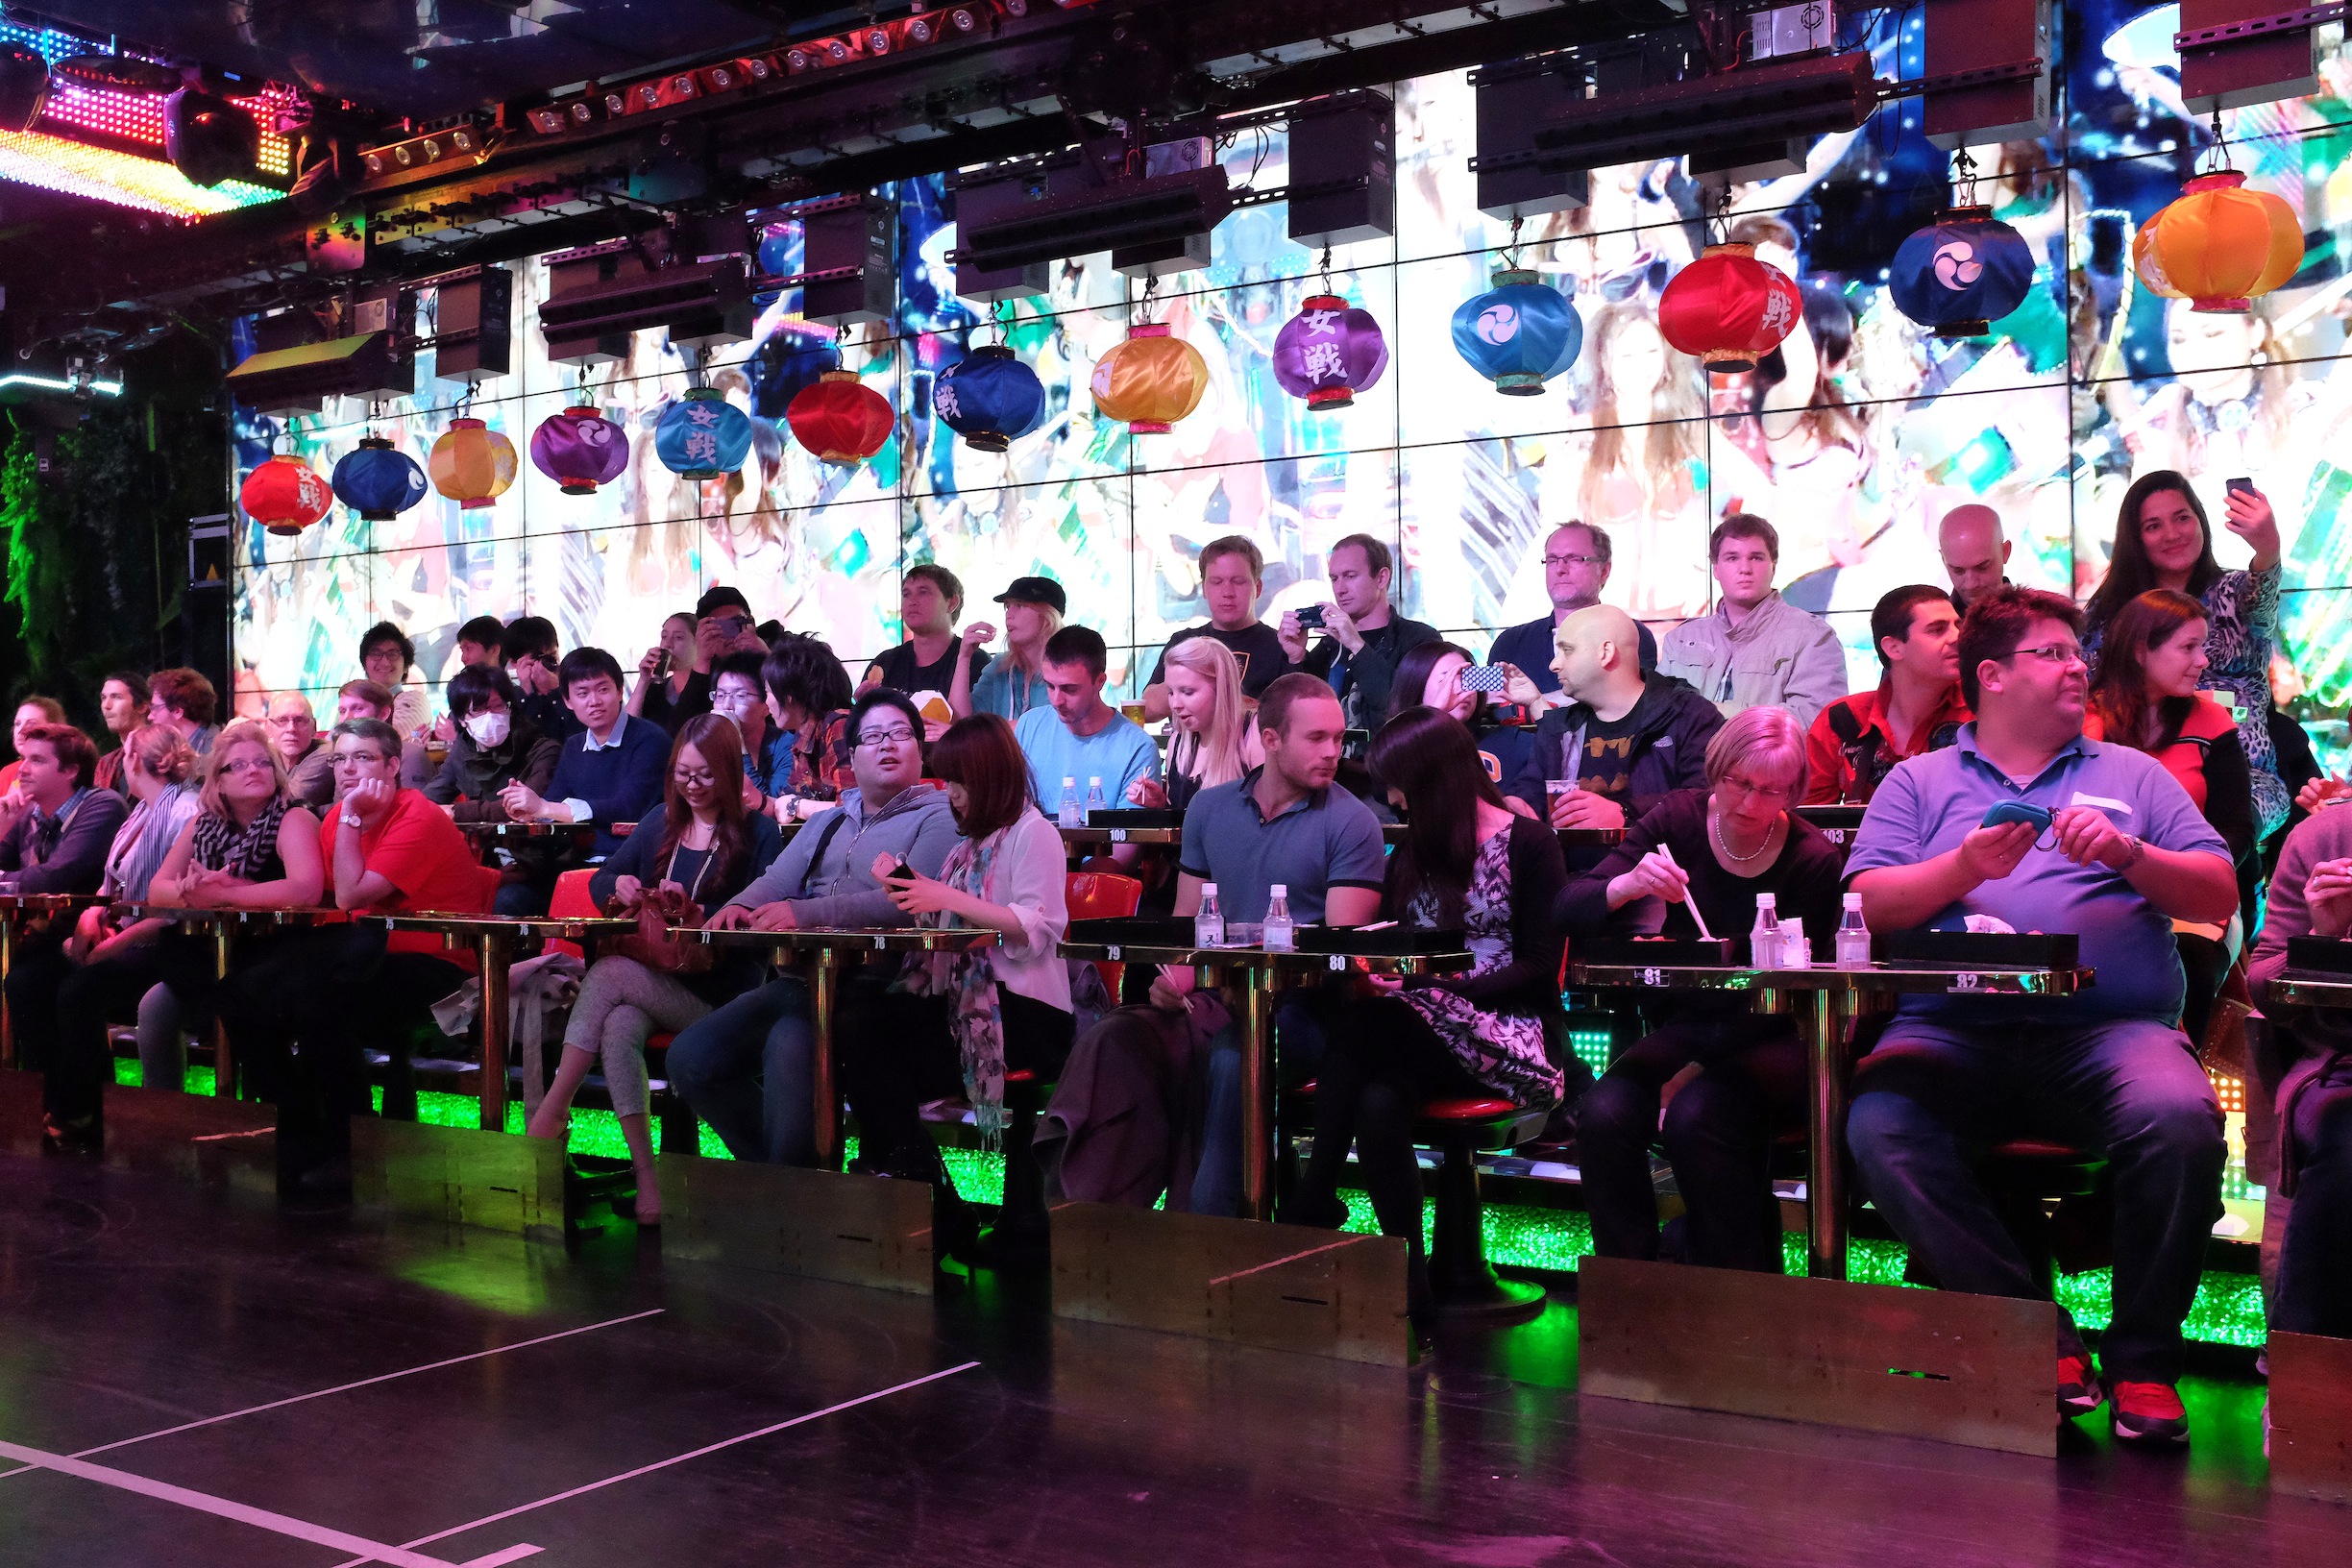 ned marts høst All You Need To Know About Tokyo's Robot Restaurant - Klook Travel Blog